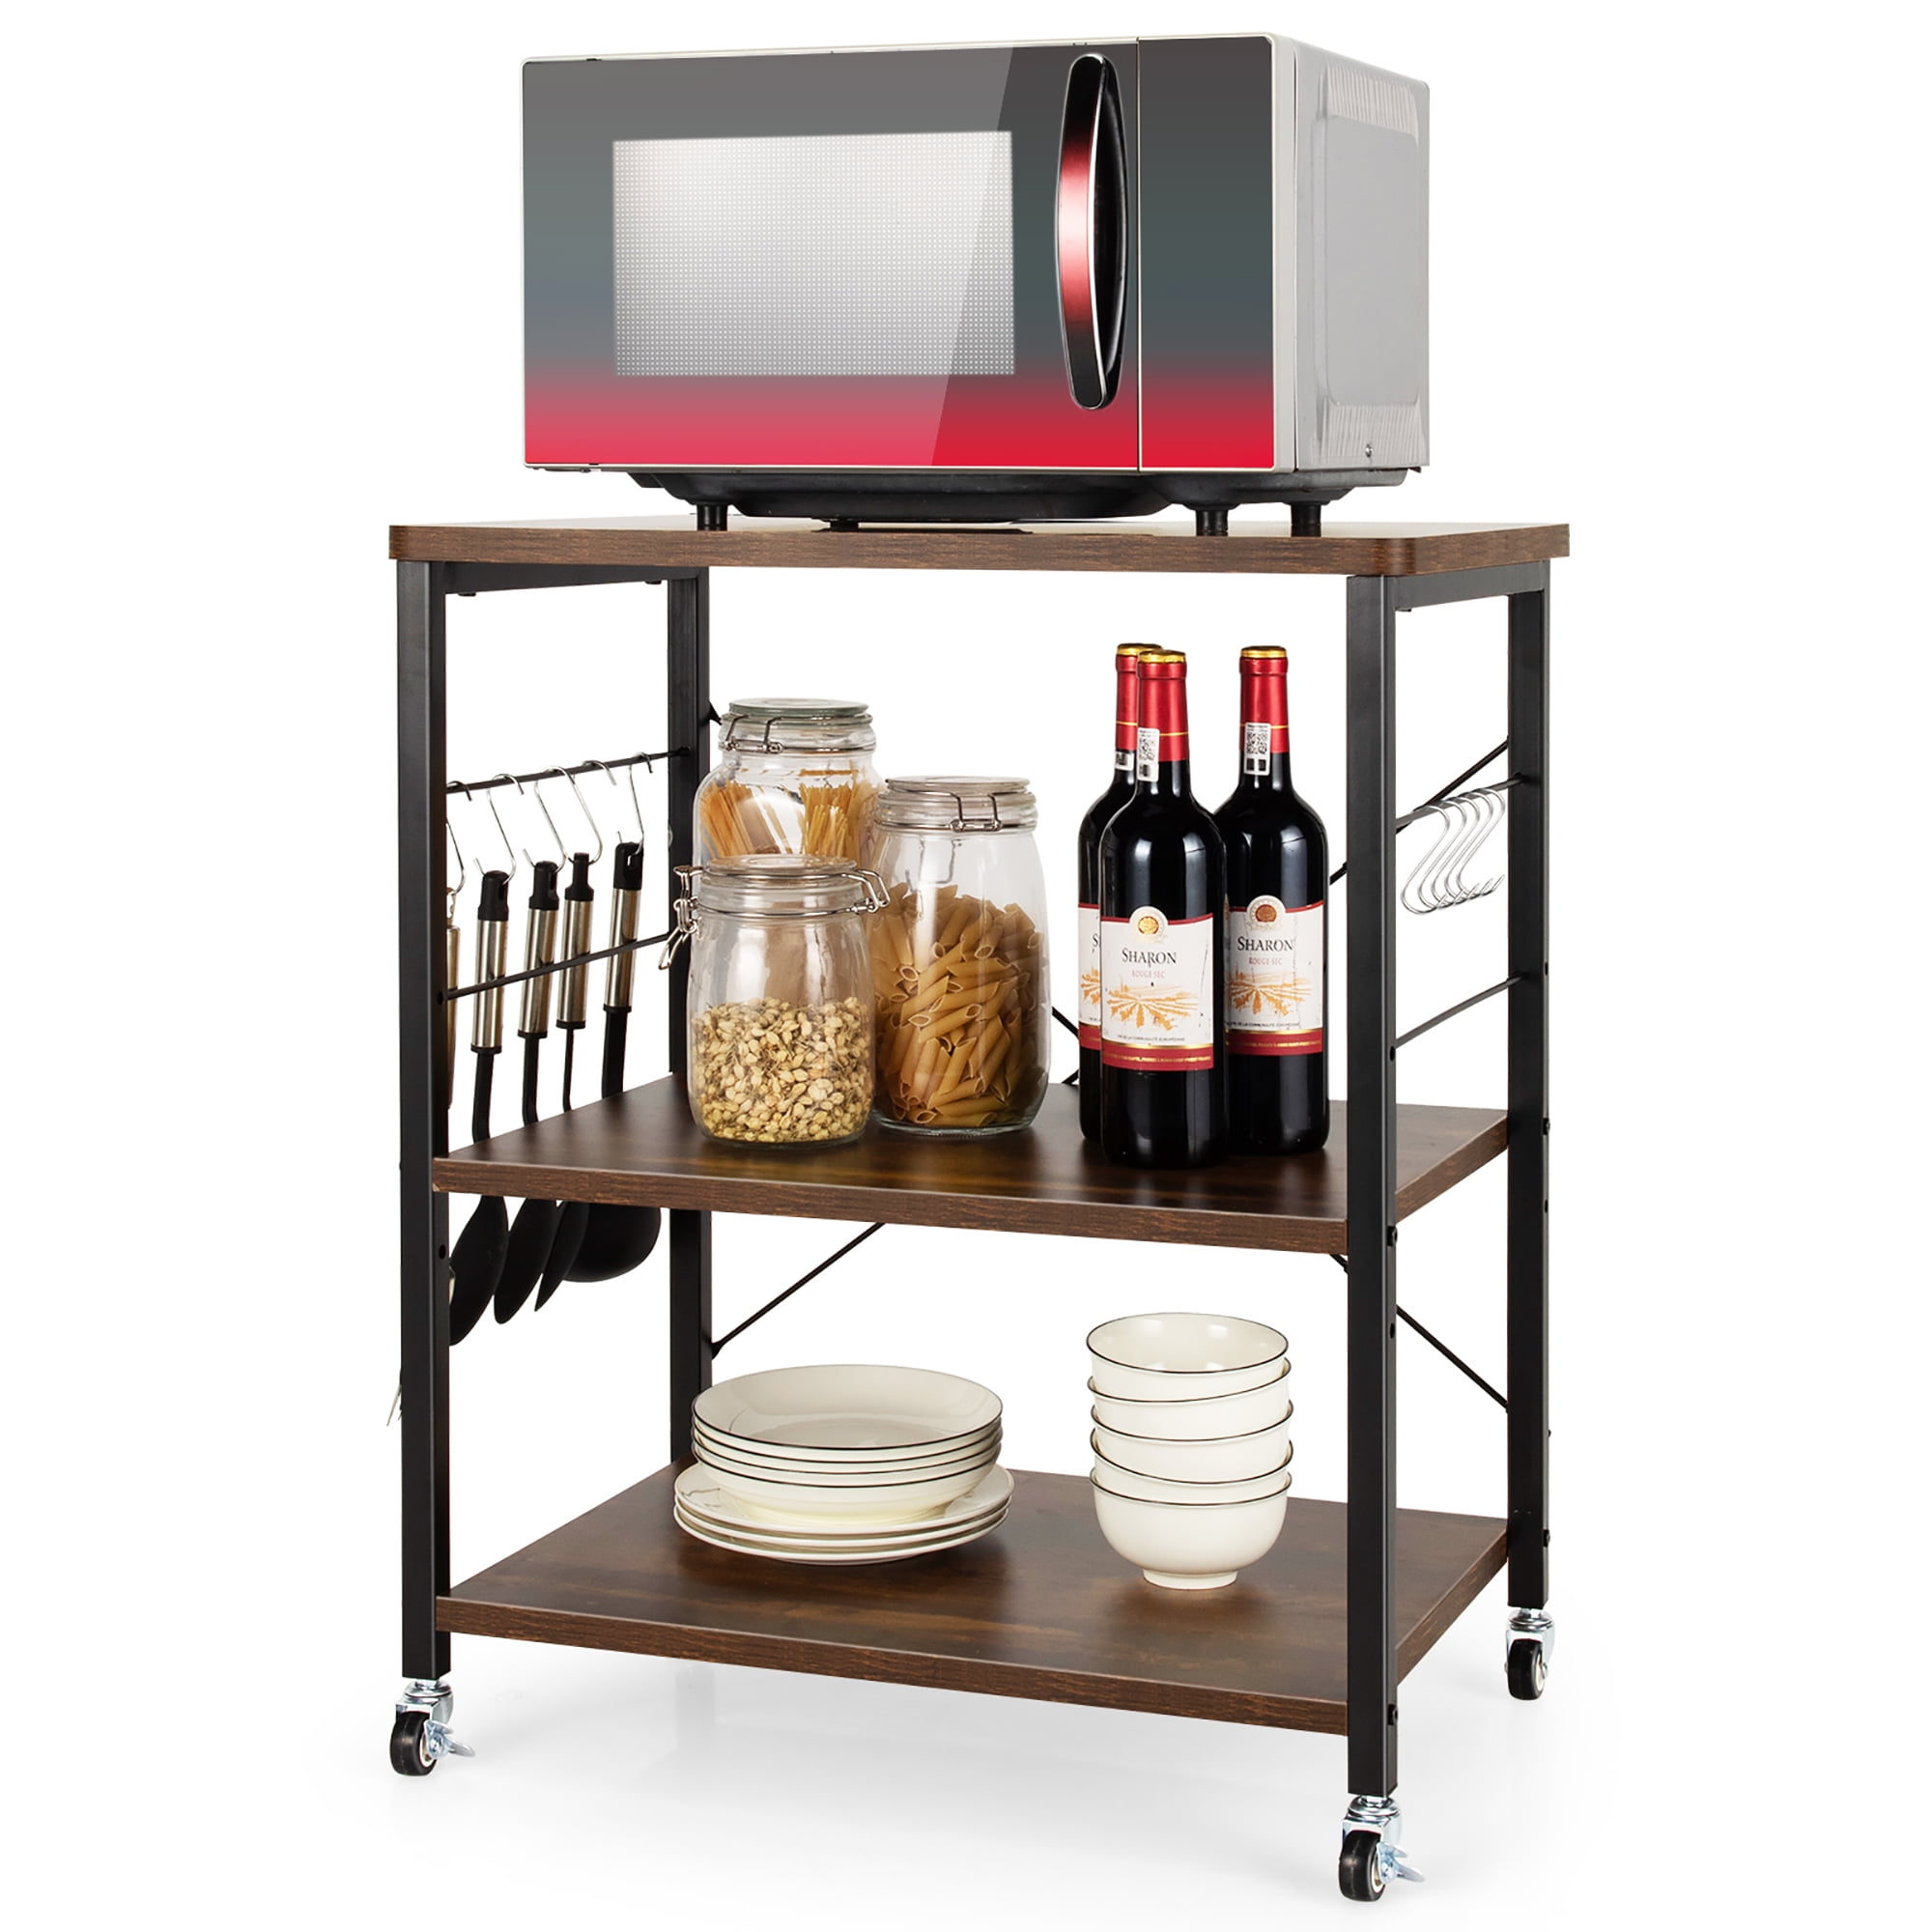 Details about   3 Layer Microwave Oven Cart Bakers Rack Kitchen Storage Shelves Organizer 